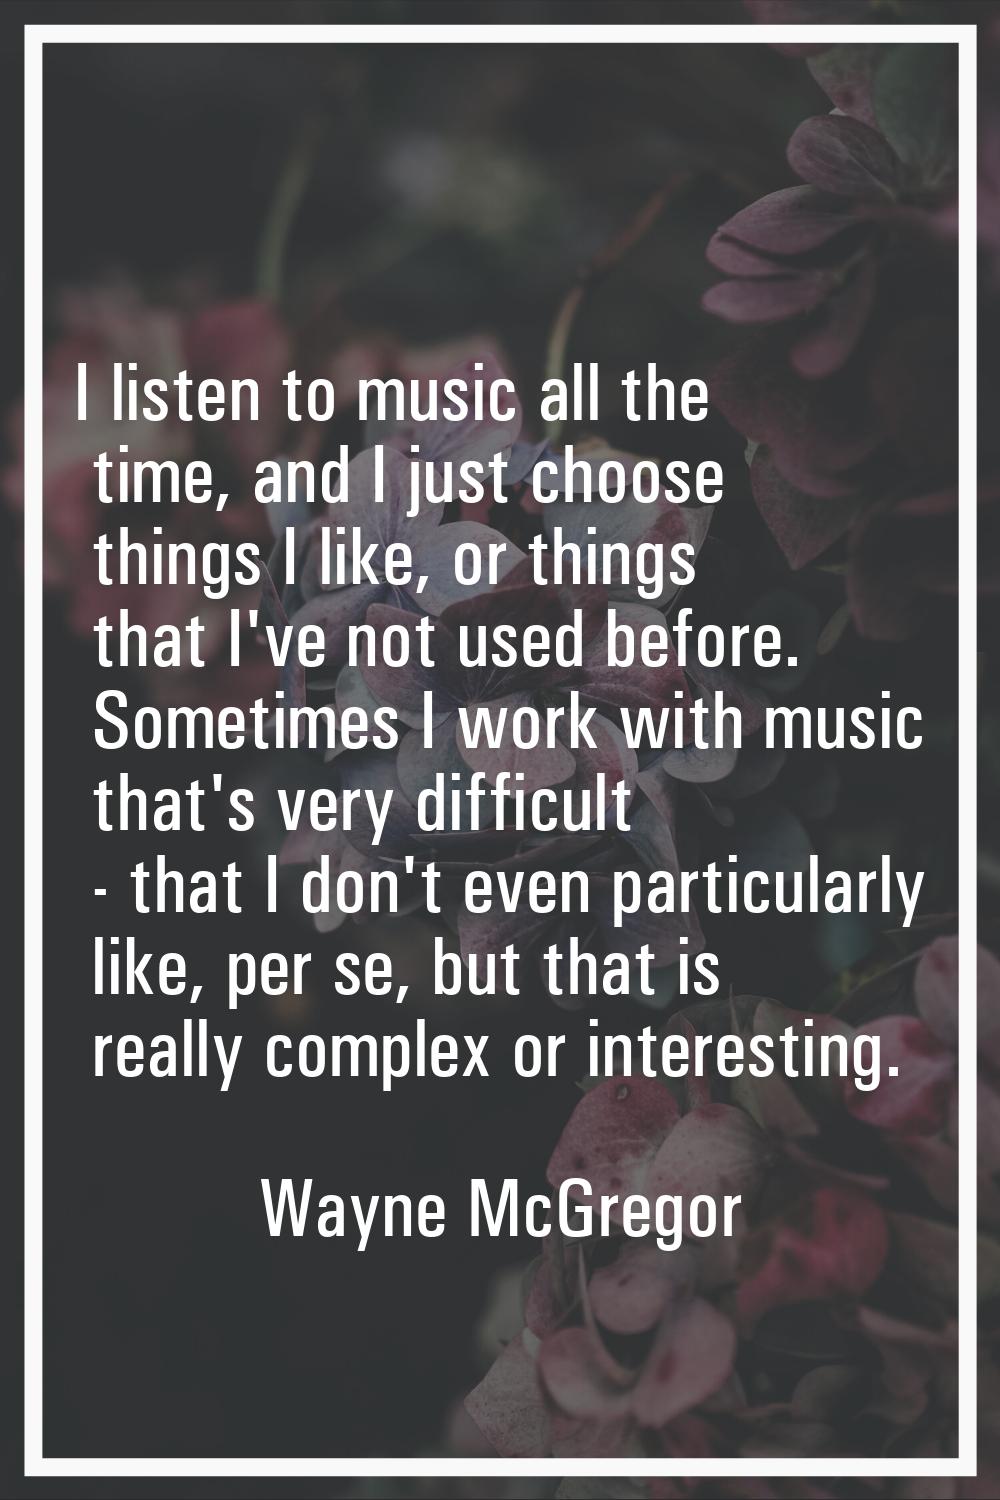 I listen to music all the time, and I just choose things I like, or things that I've not used befor